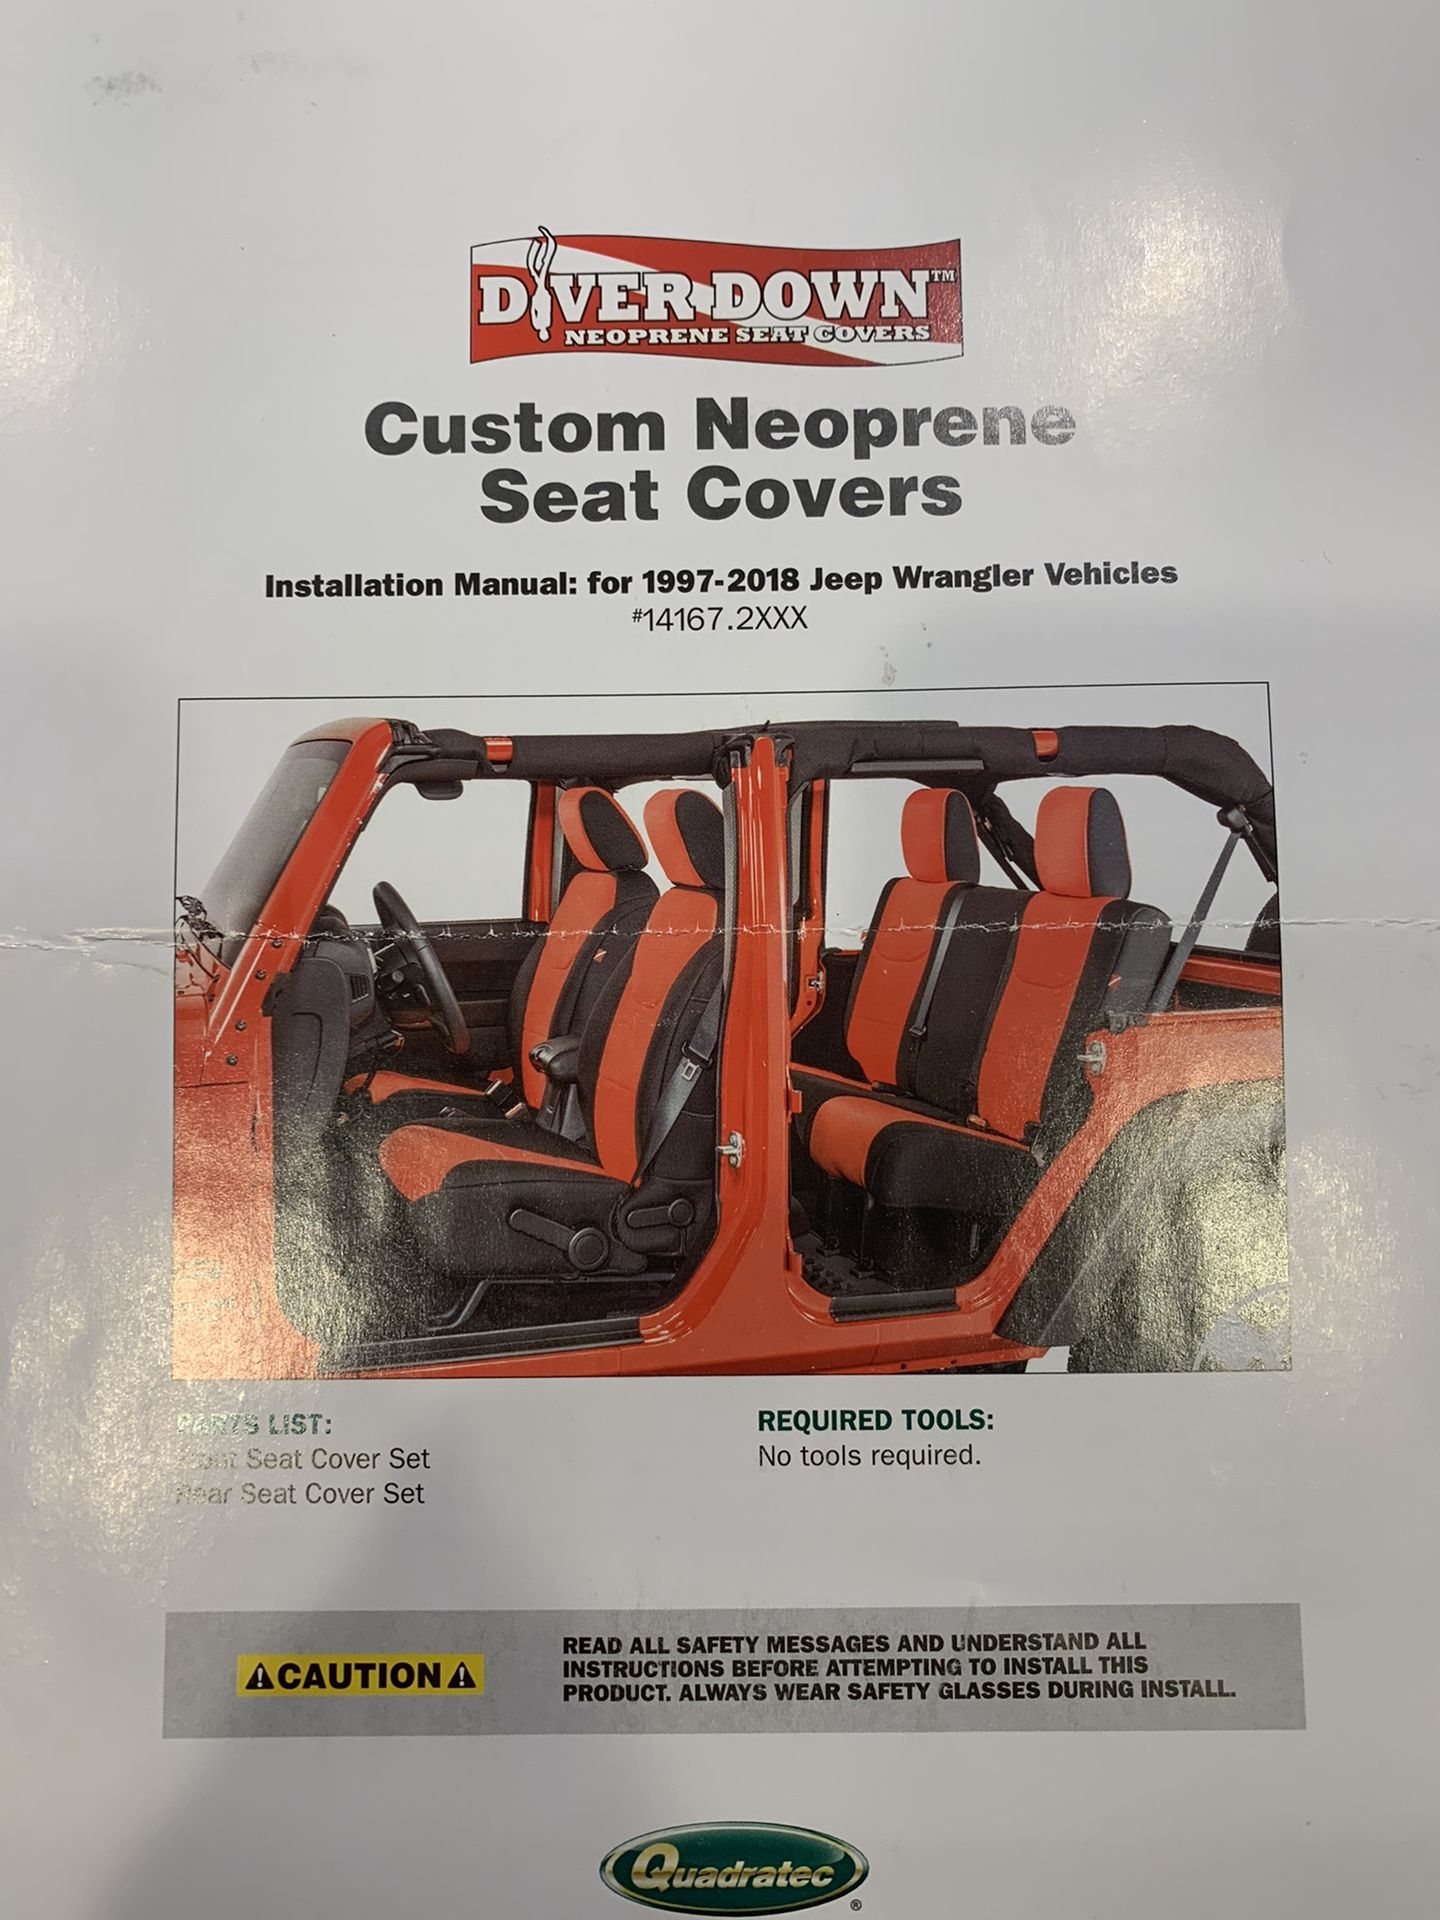 -NEW!-Neoprene seat covers (black/gray) to fit 2007-2018 Jeep Wrangler